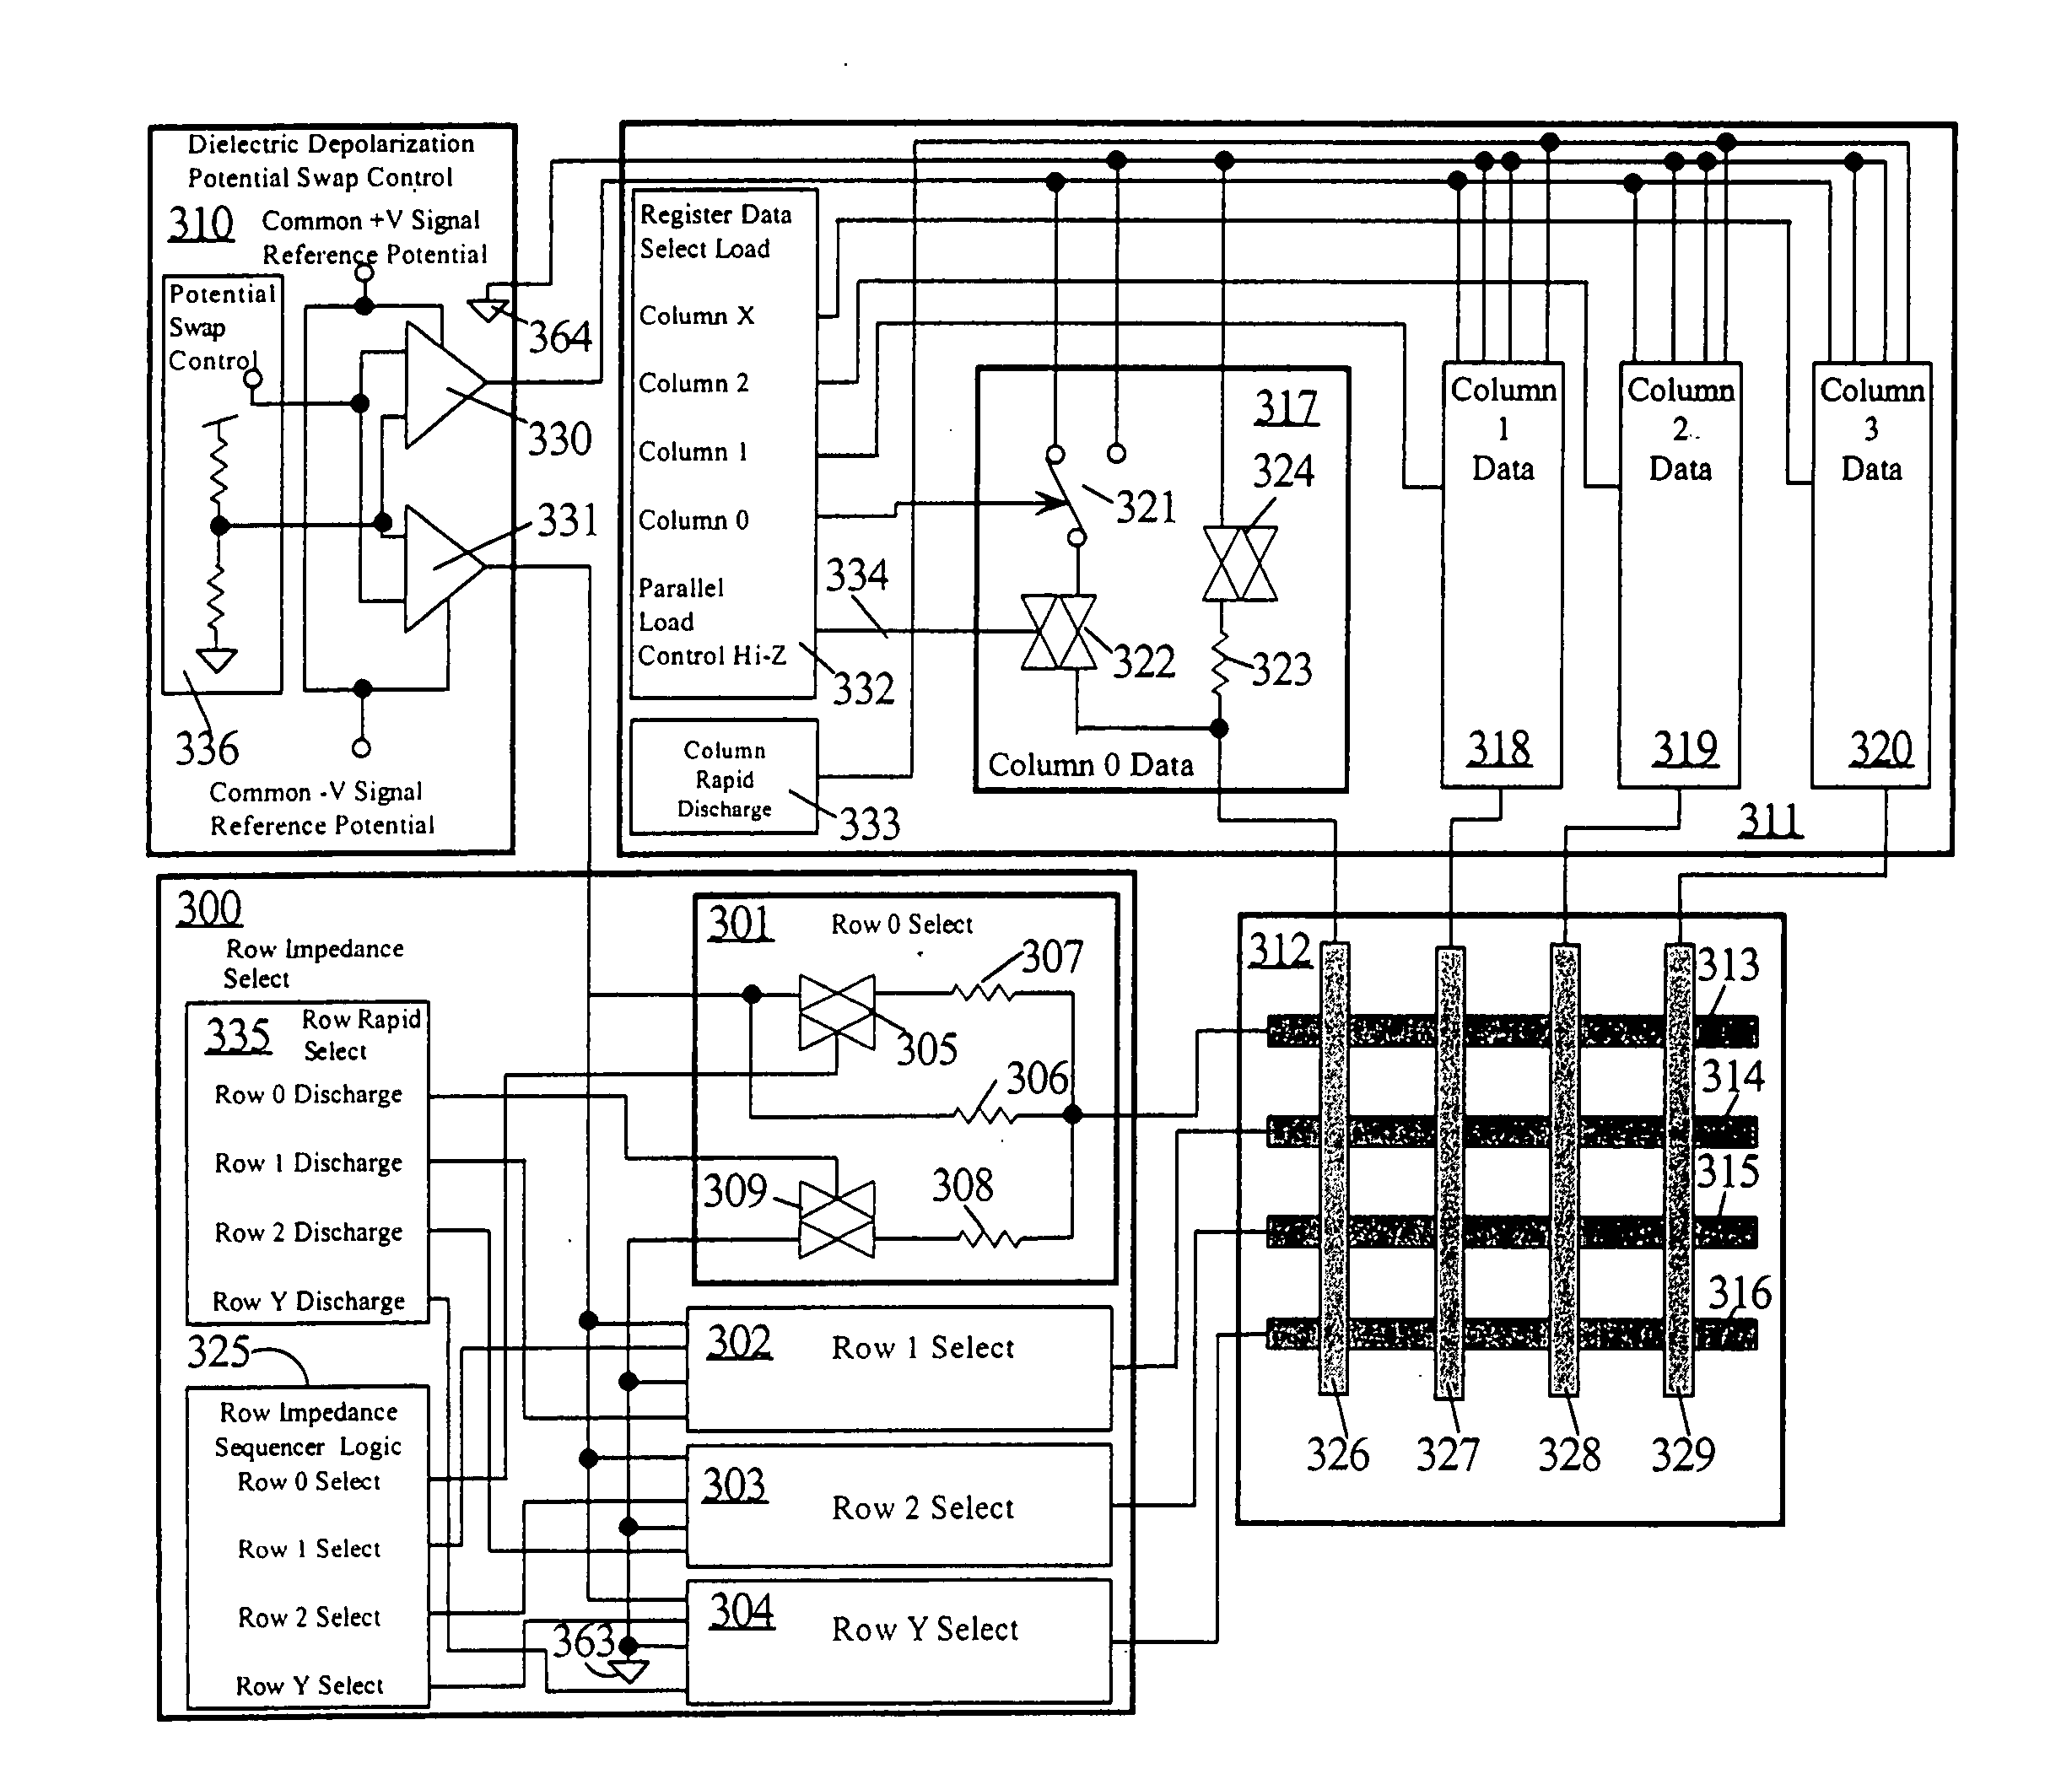 Simple matrix addressing in a display